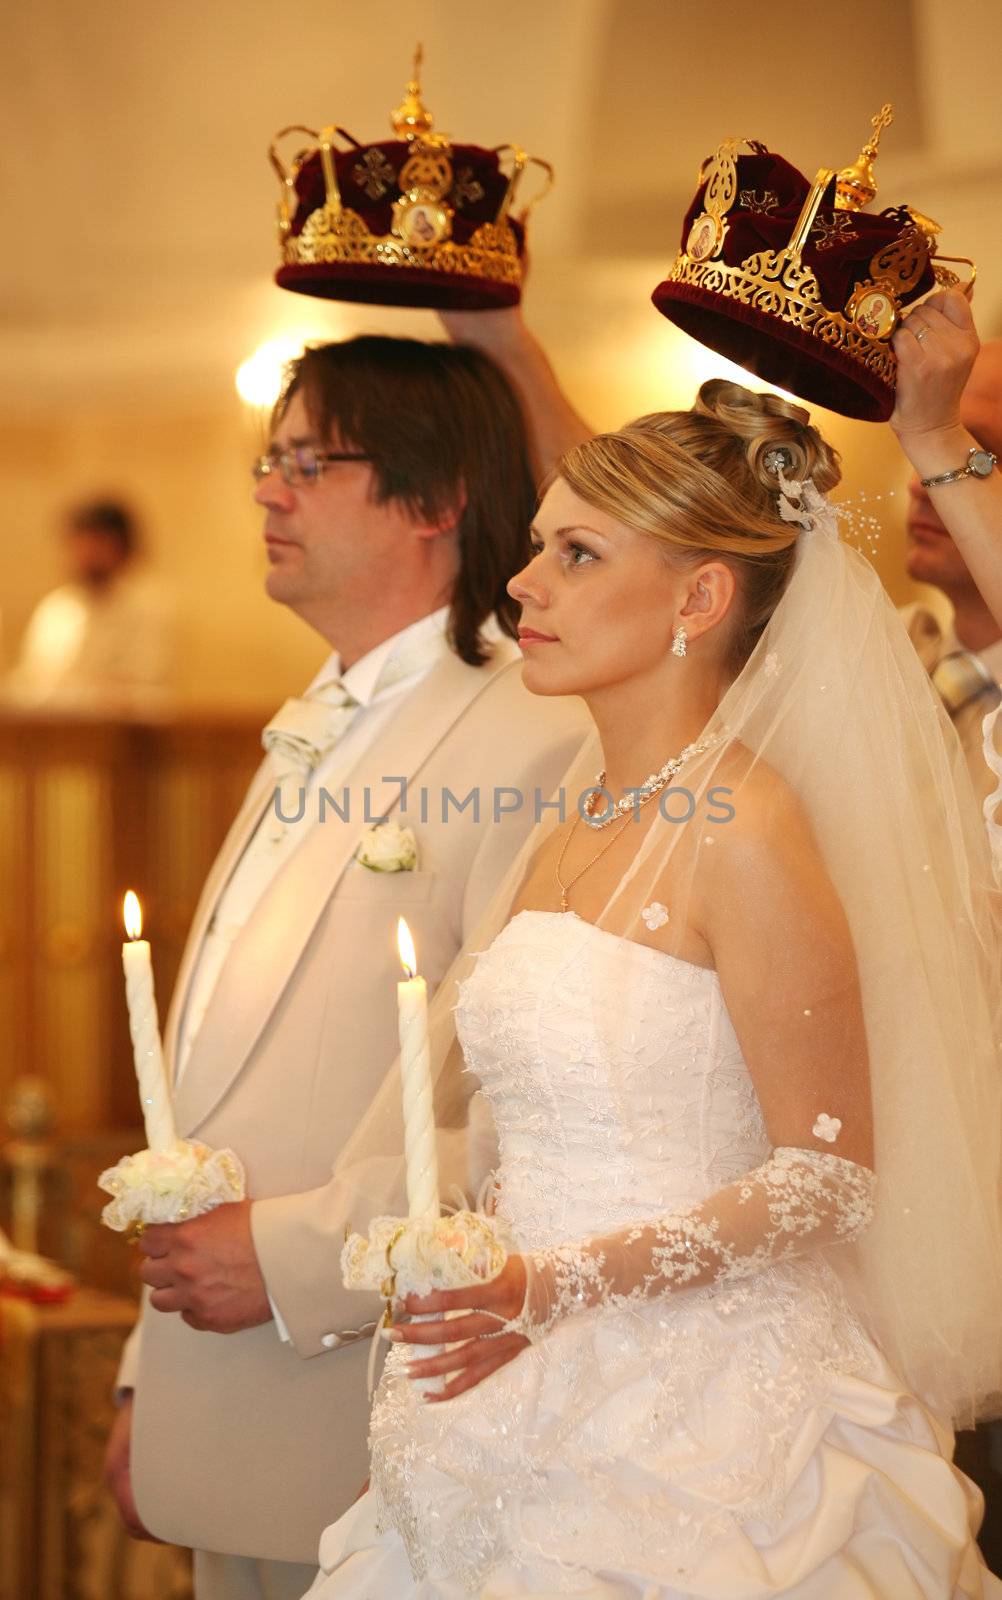 The groom and the bride with candles. Wedding ceremony in church